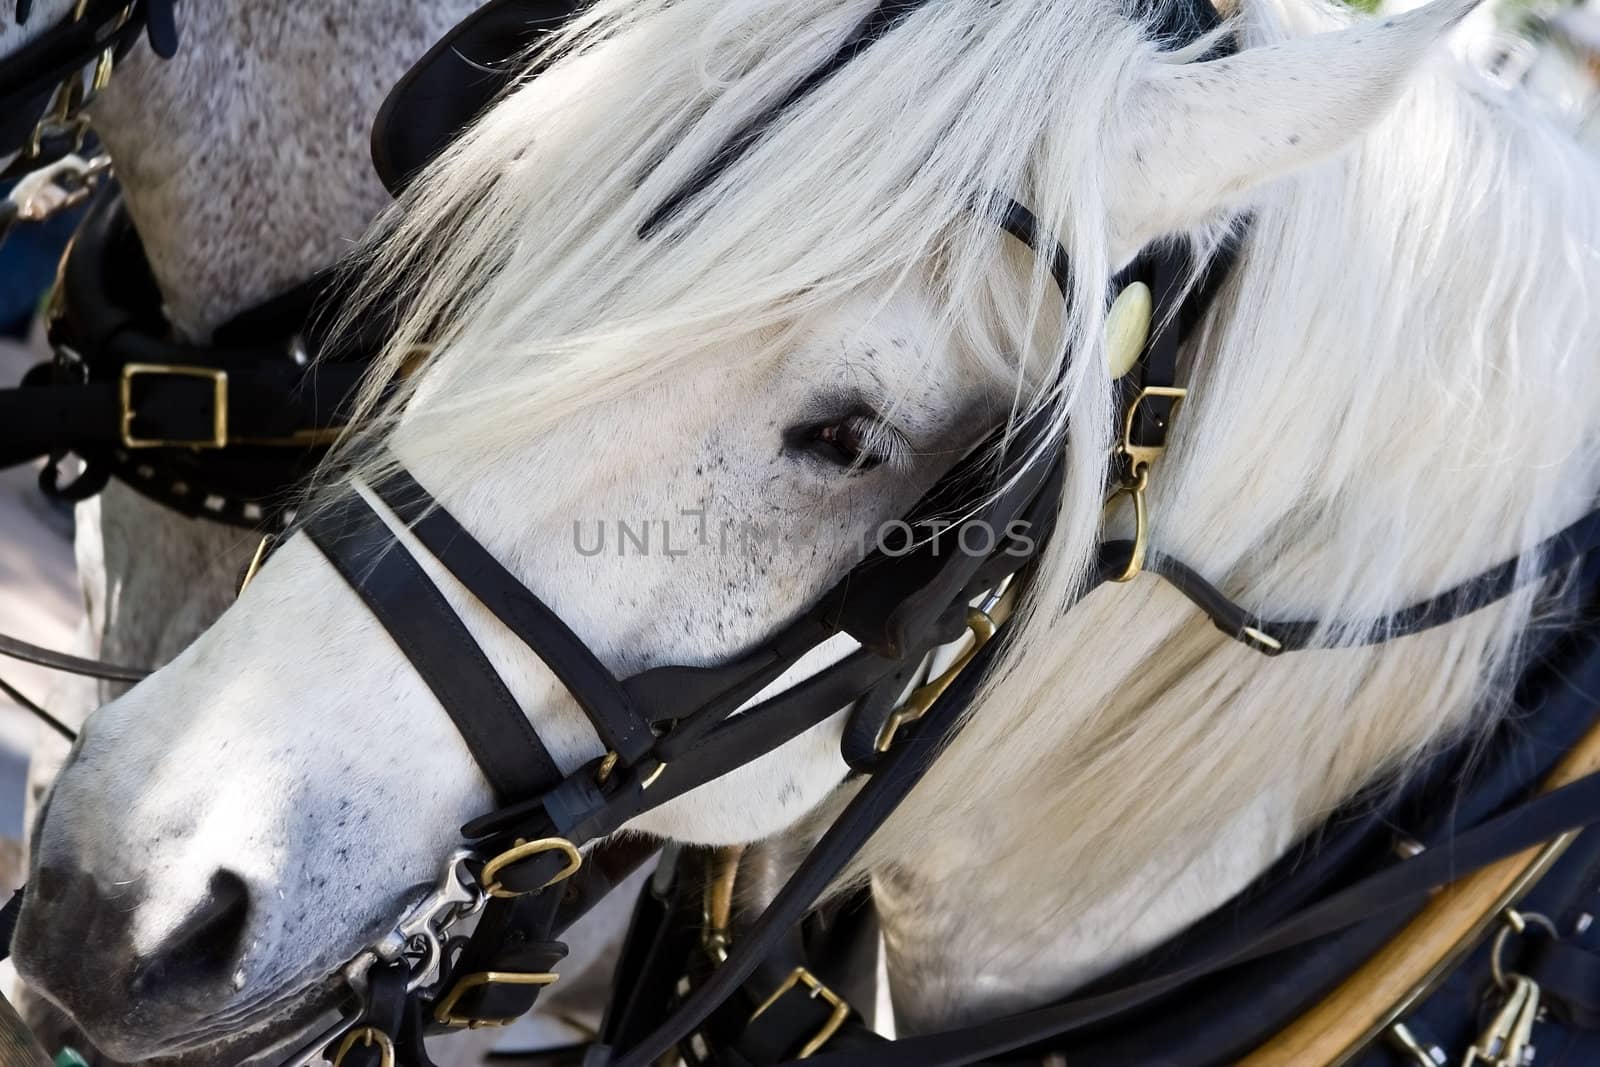 close up of a white horse hooked up to a wagon